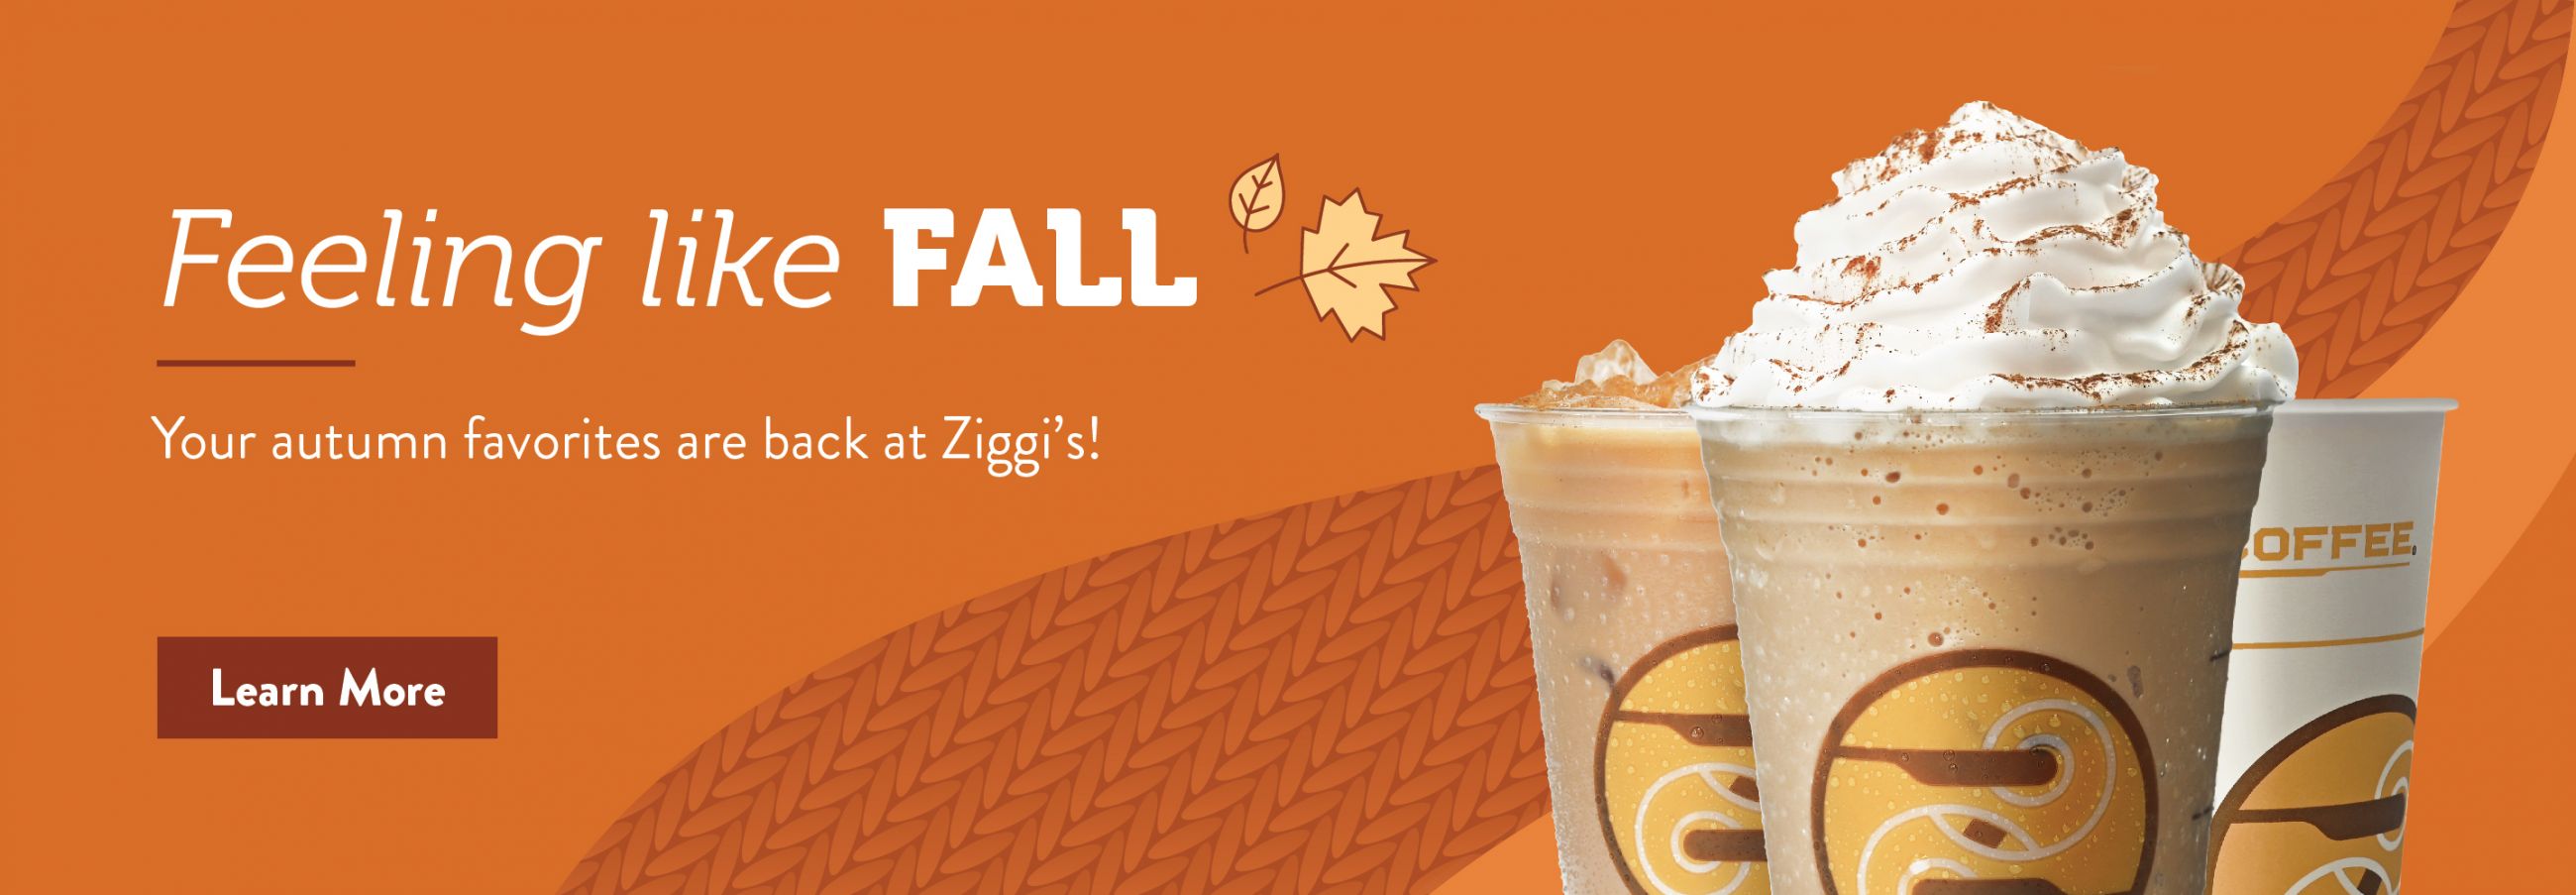 Feeling like Fall text on an orange background with 3 drink images